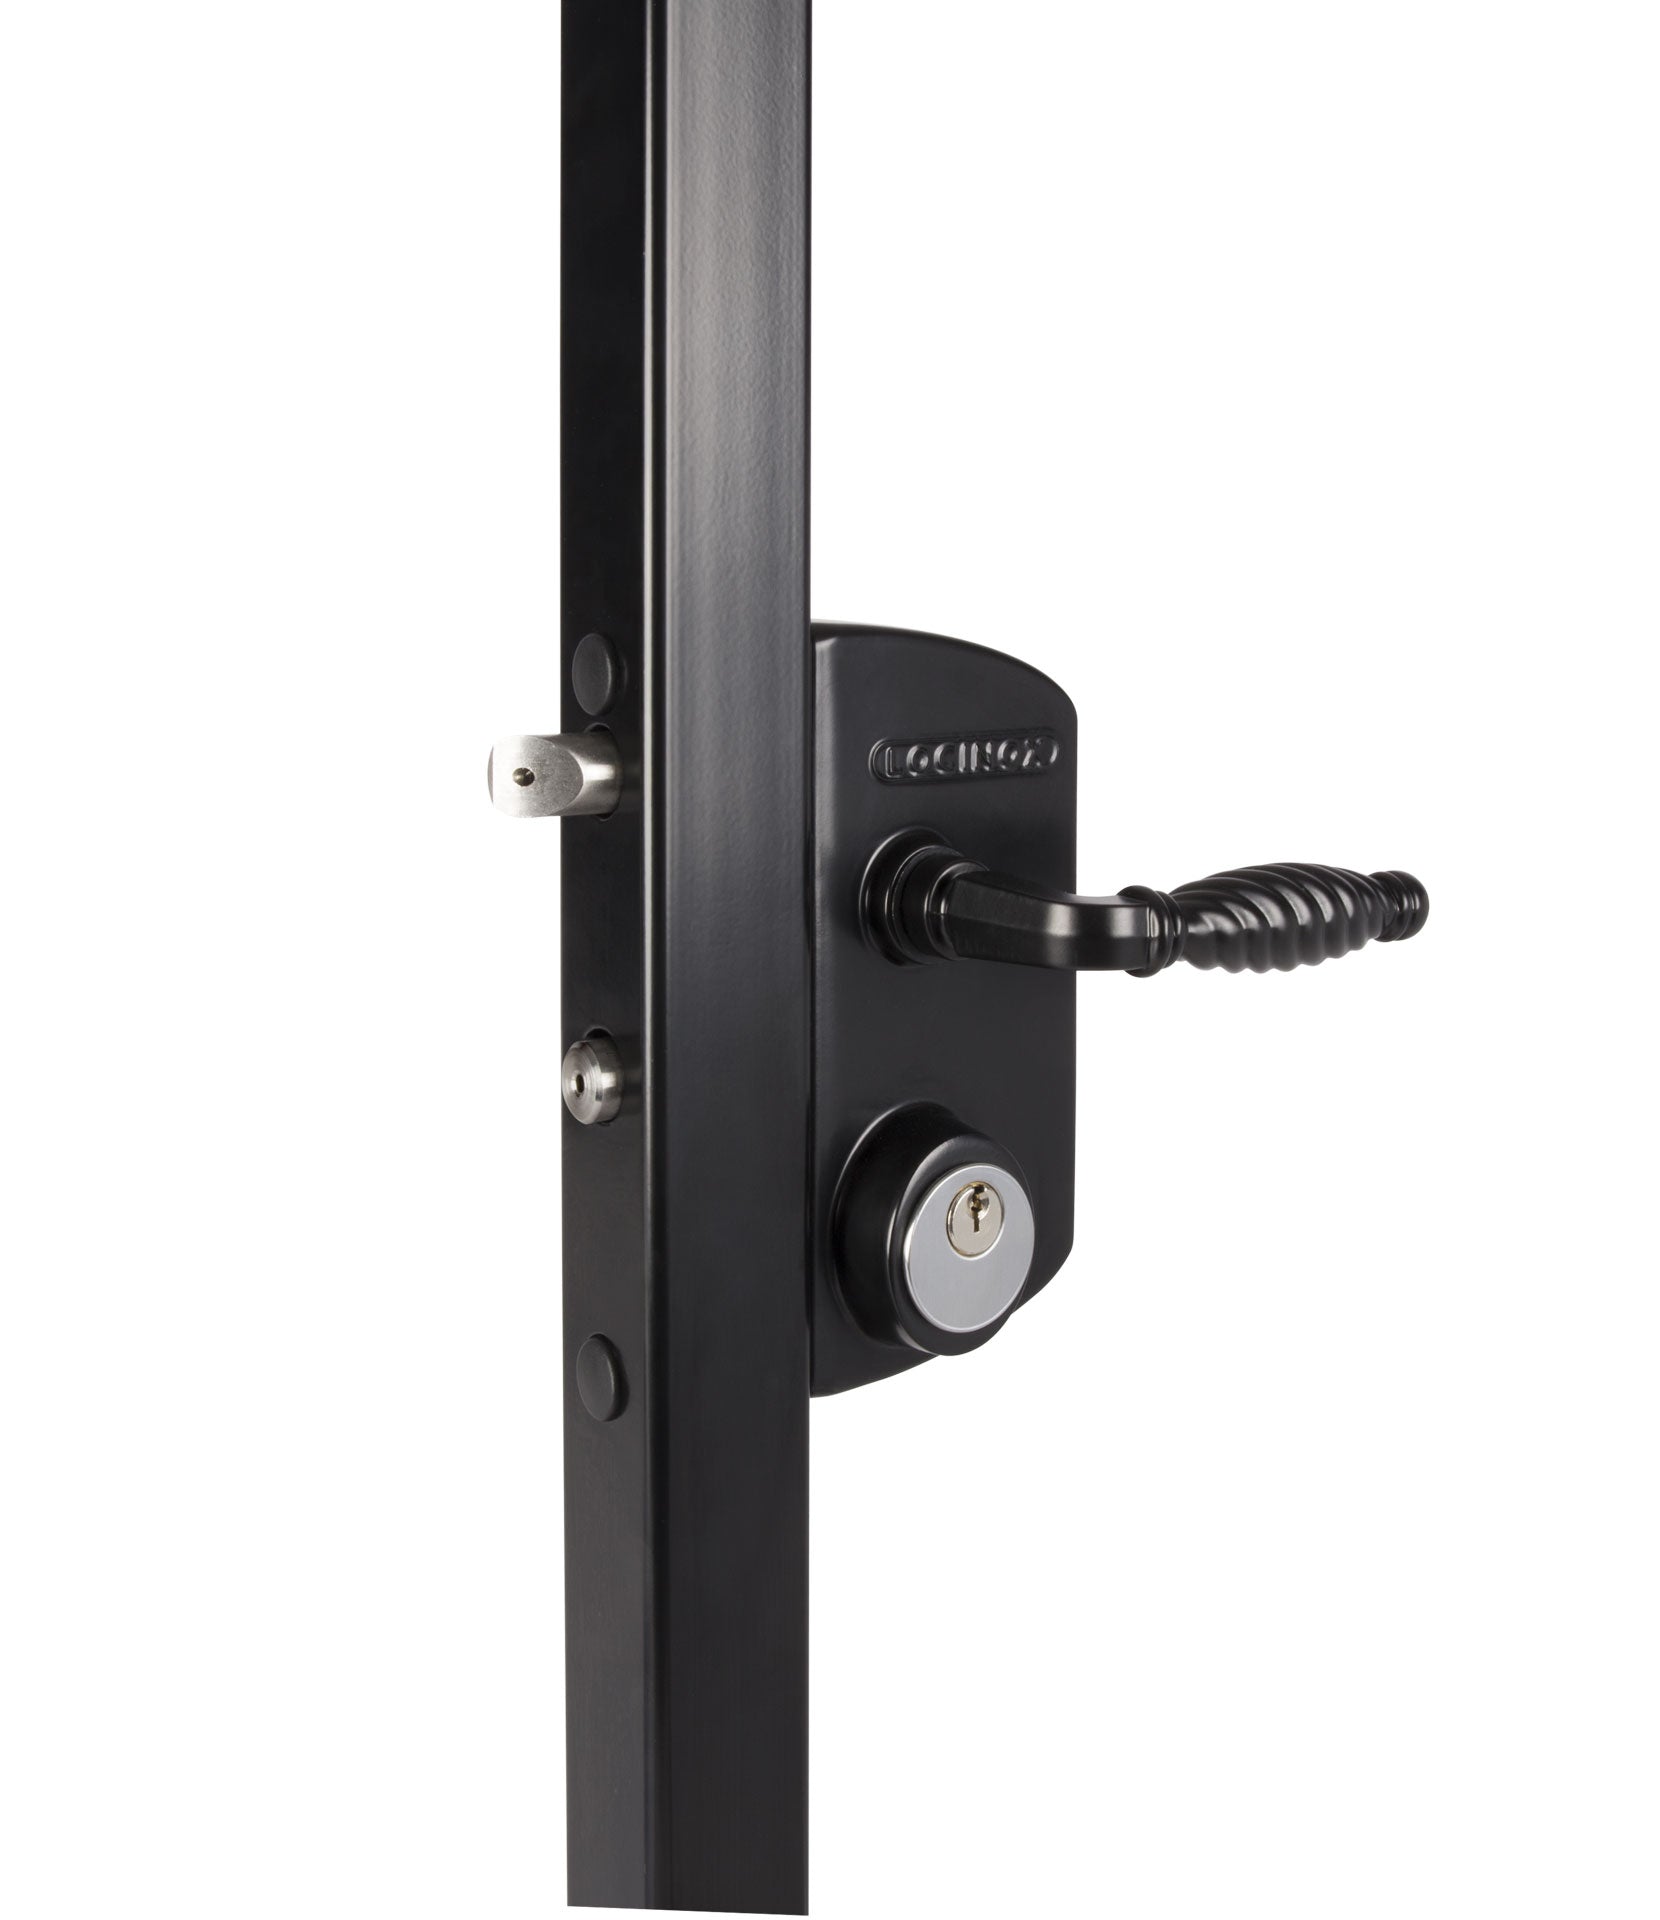 US Mortise Cylinder Gate Lock - For Square or Flat Profiles 3/8" to 2-3/4" - Black Finish - Sold Individually